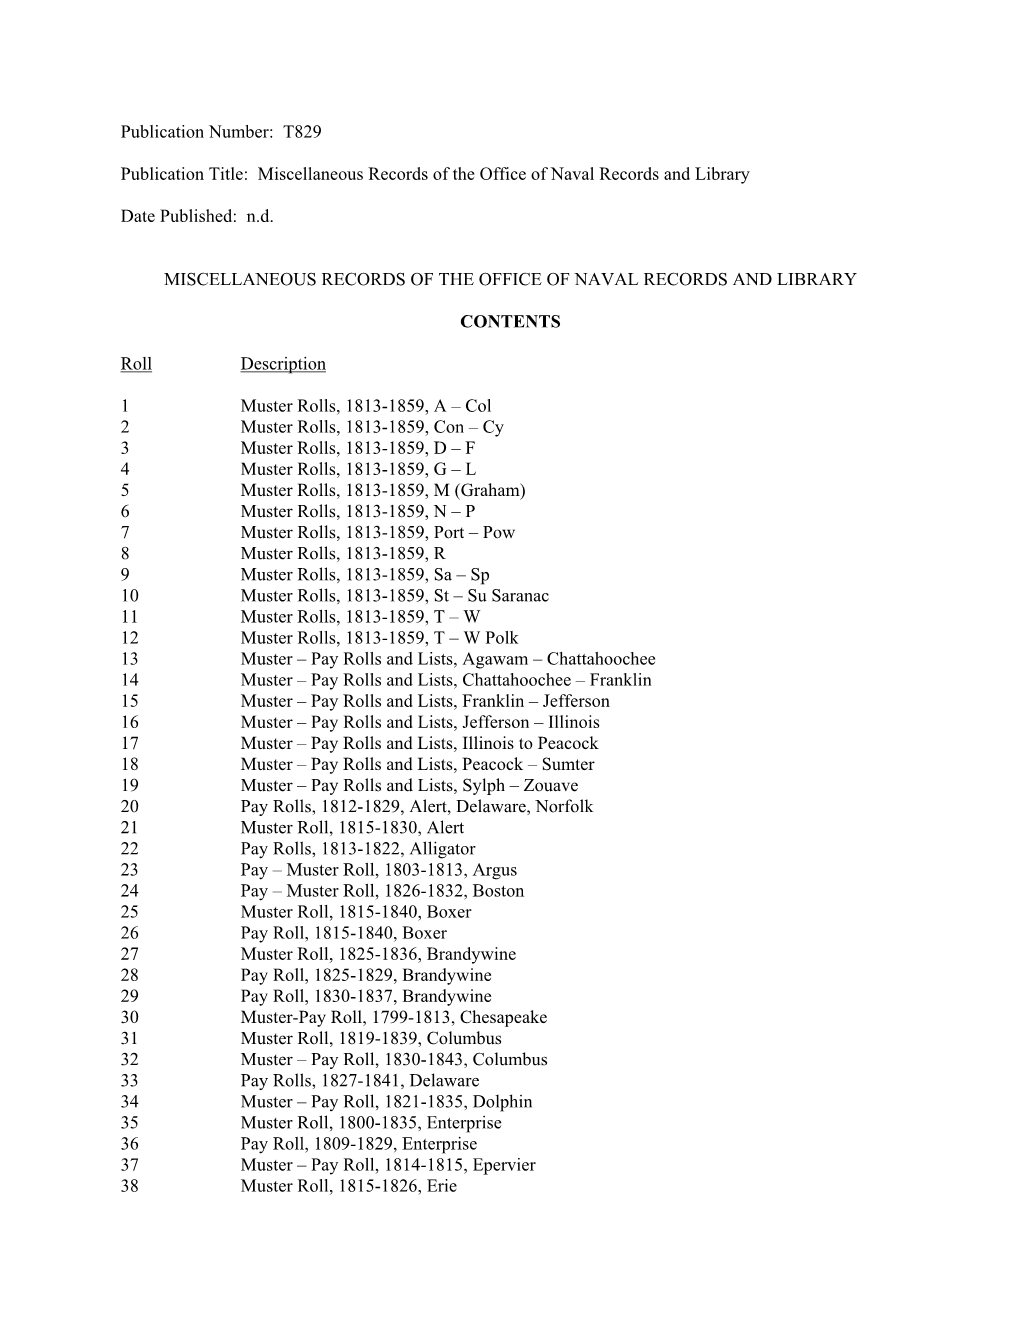 Publication Number: T829 Publication Title: Miscellaneous Records of The